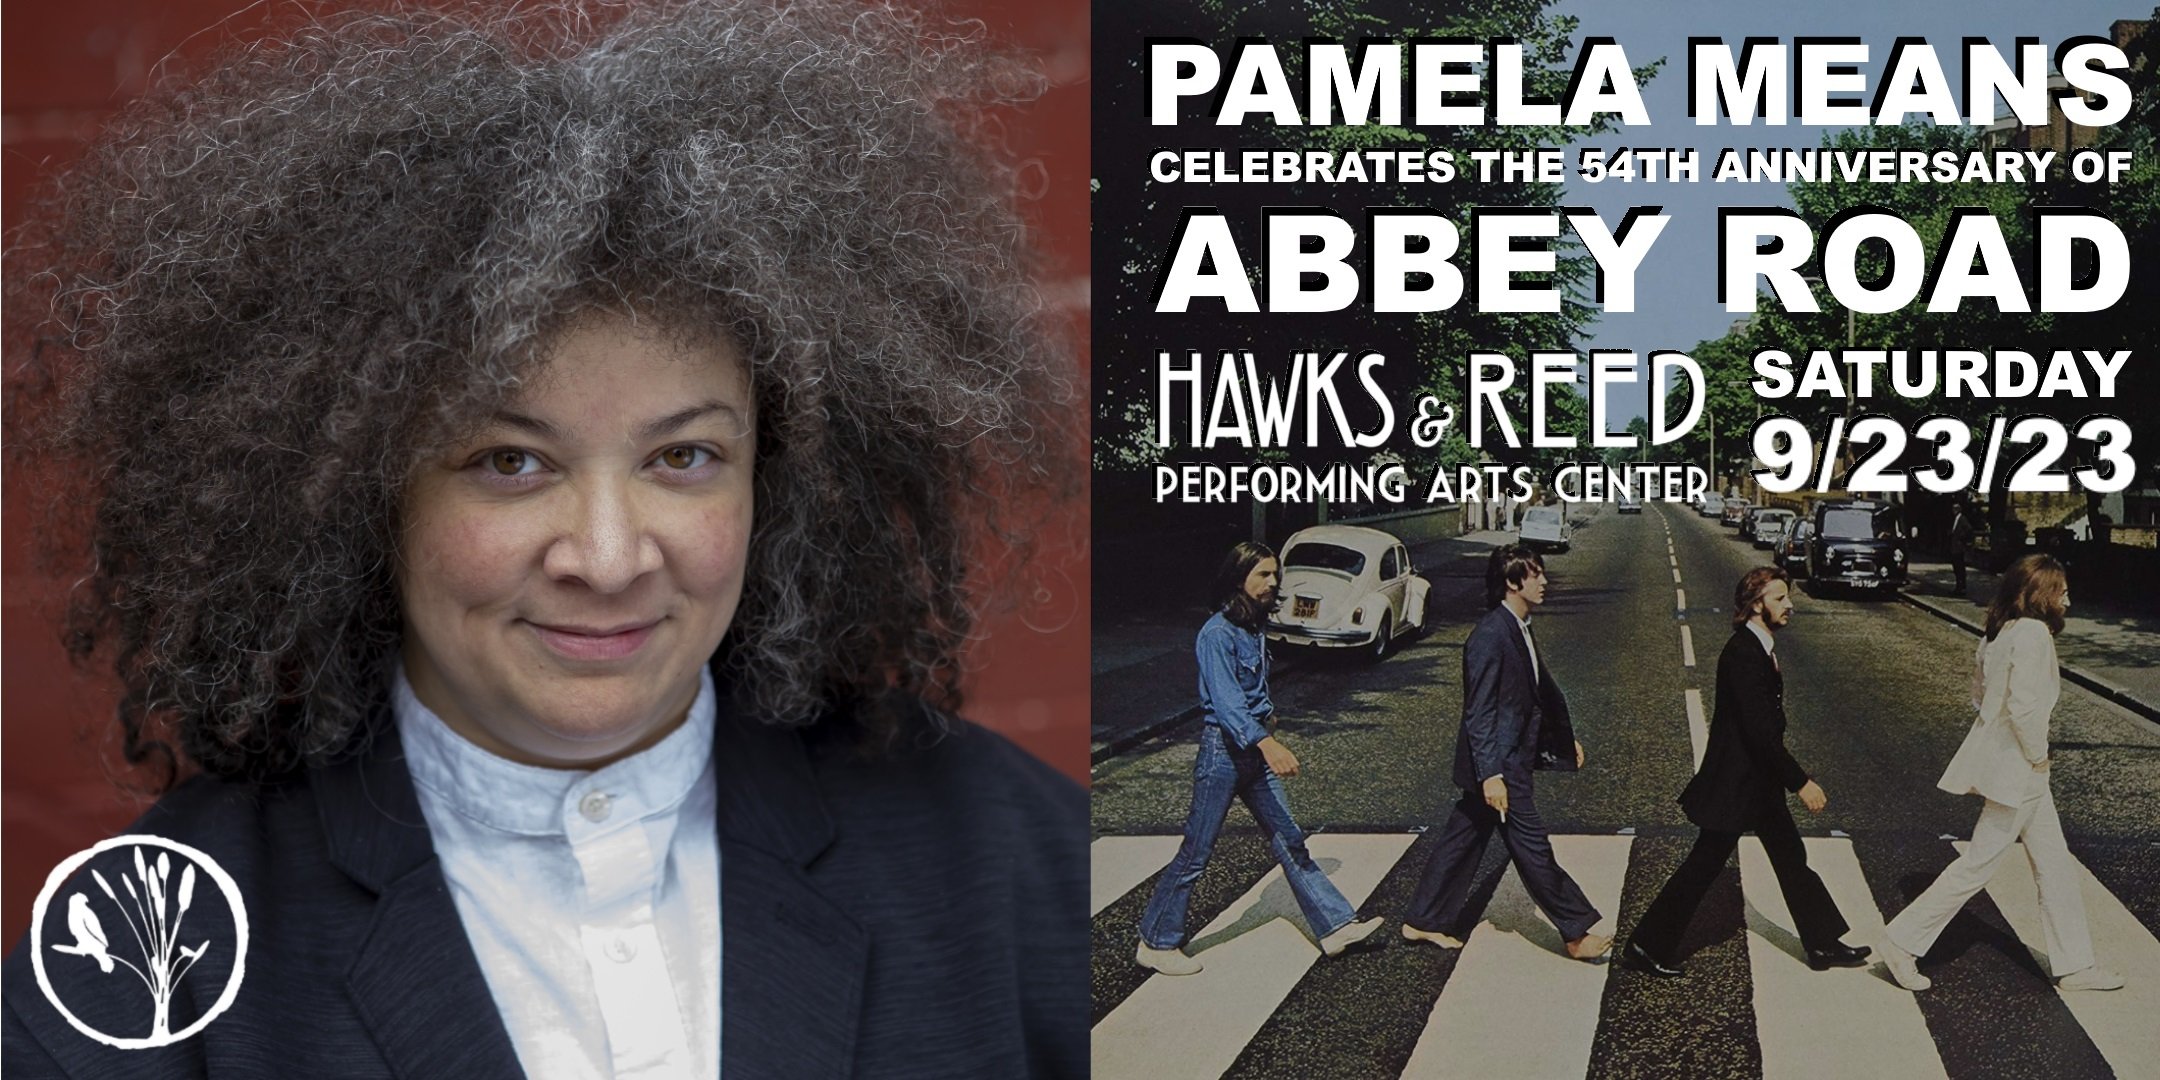 Abbey Road 54th Anniversary with Pamela Means